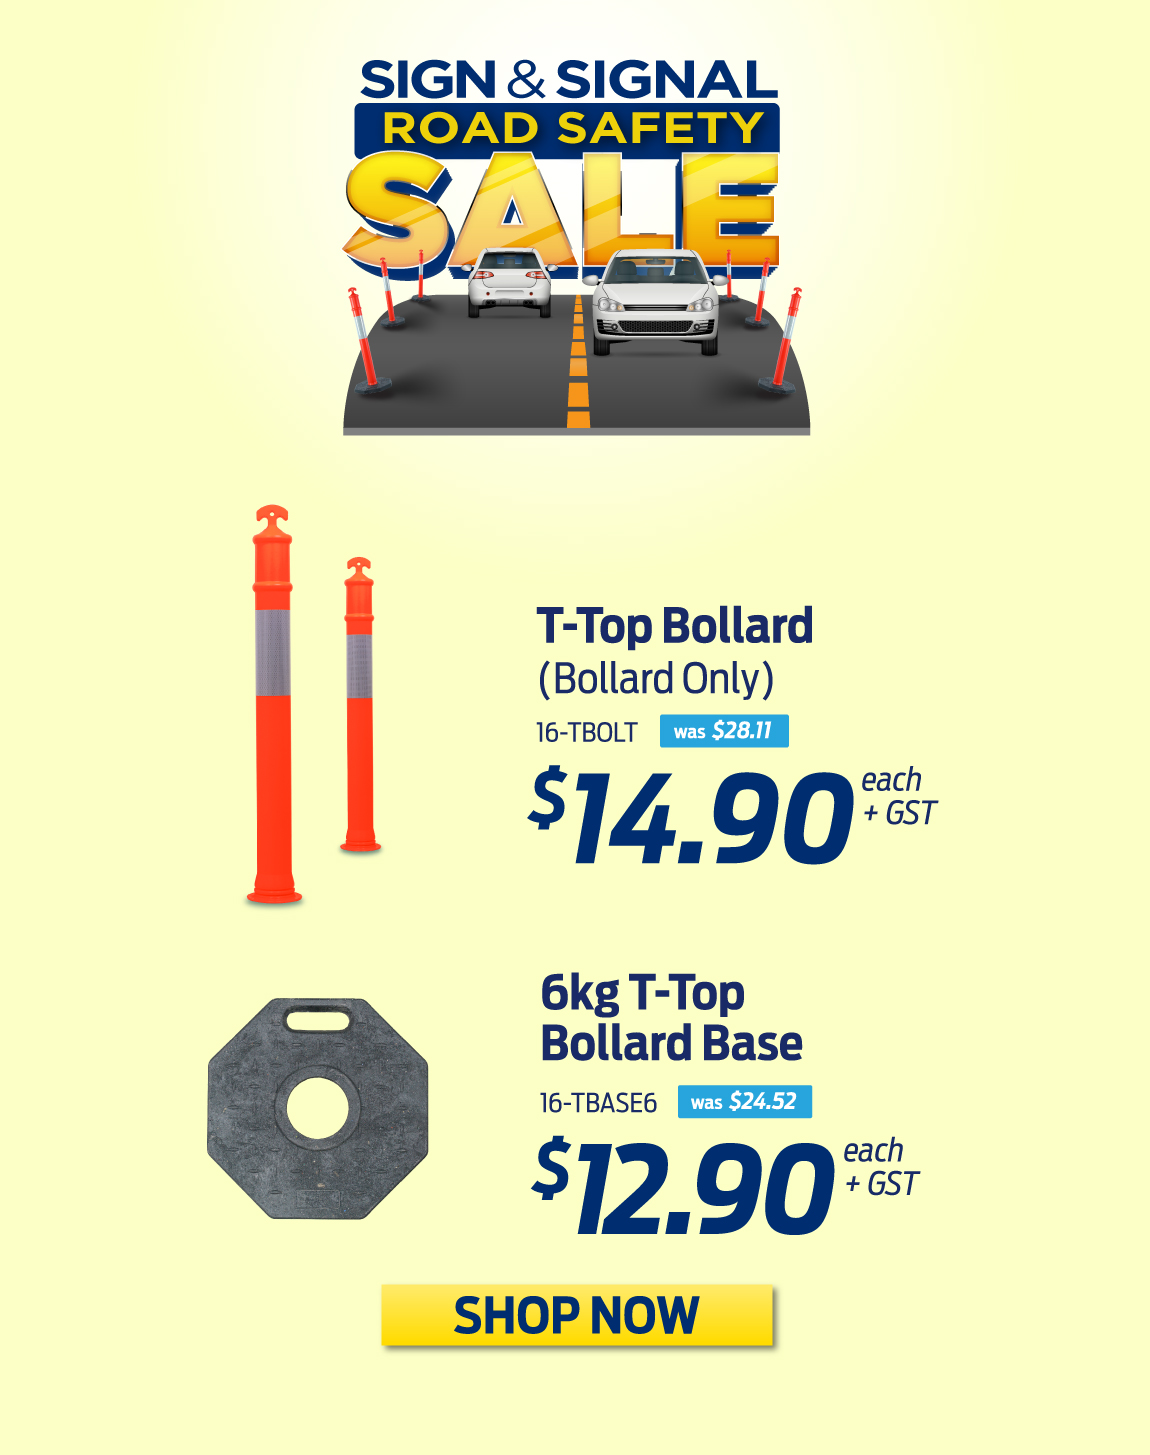 Sign & Signal Road Safety Sale - Mobile Banner - AU